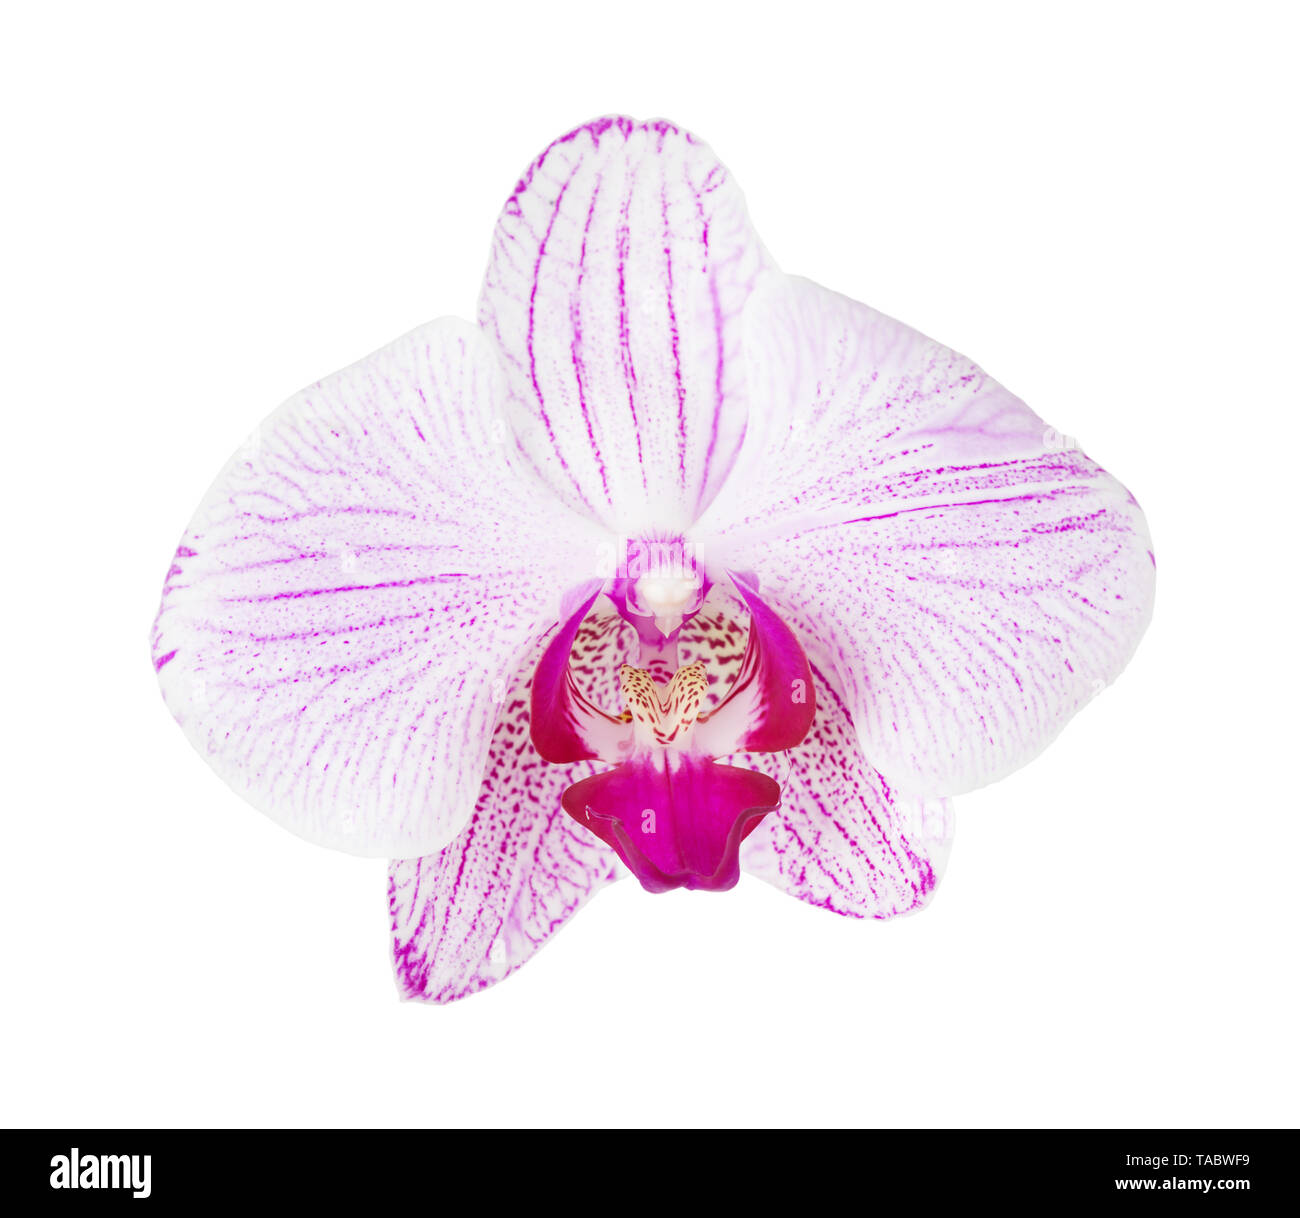 One pink striped orchid phalaenopsis flower isolated on a white background Stock Photo